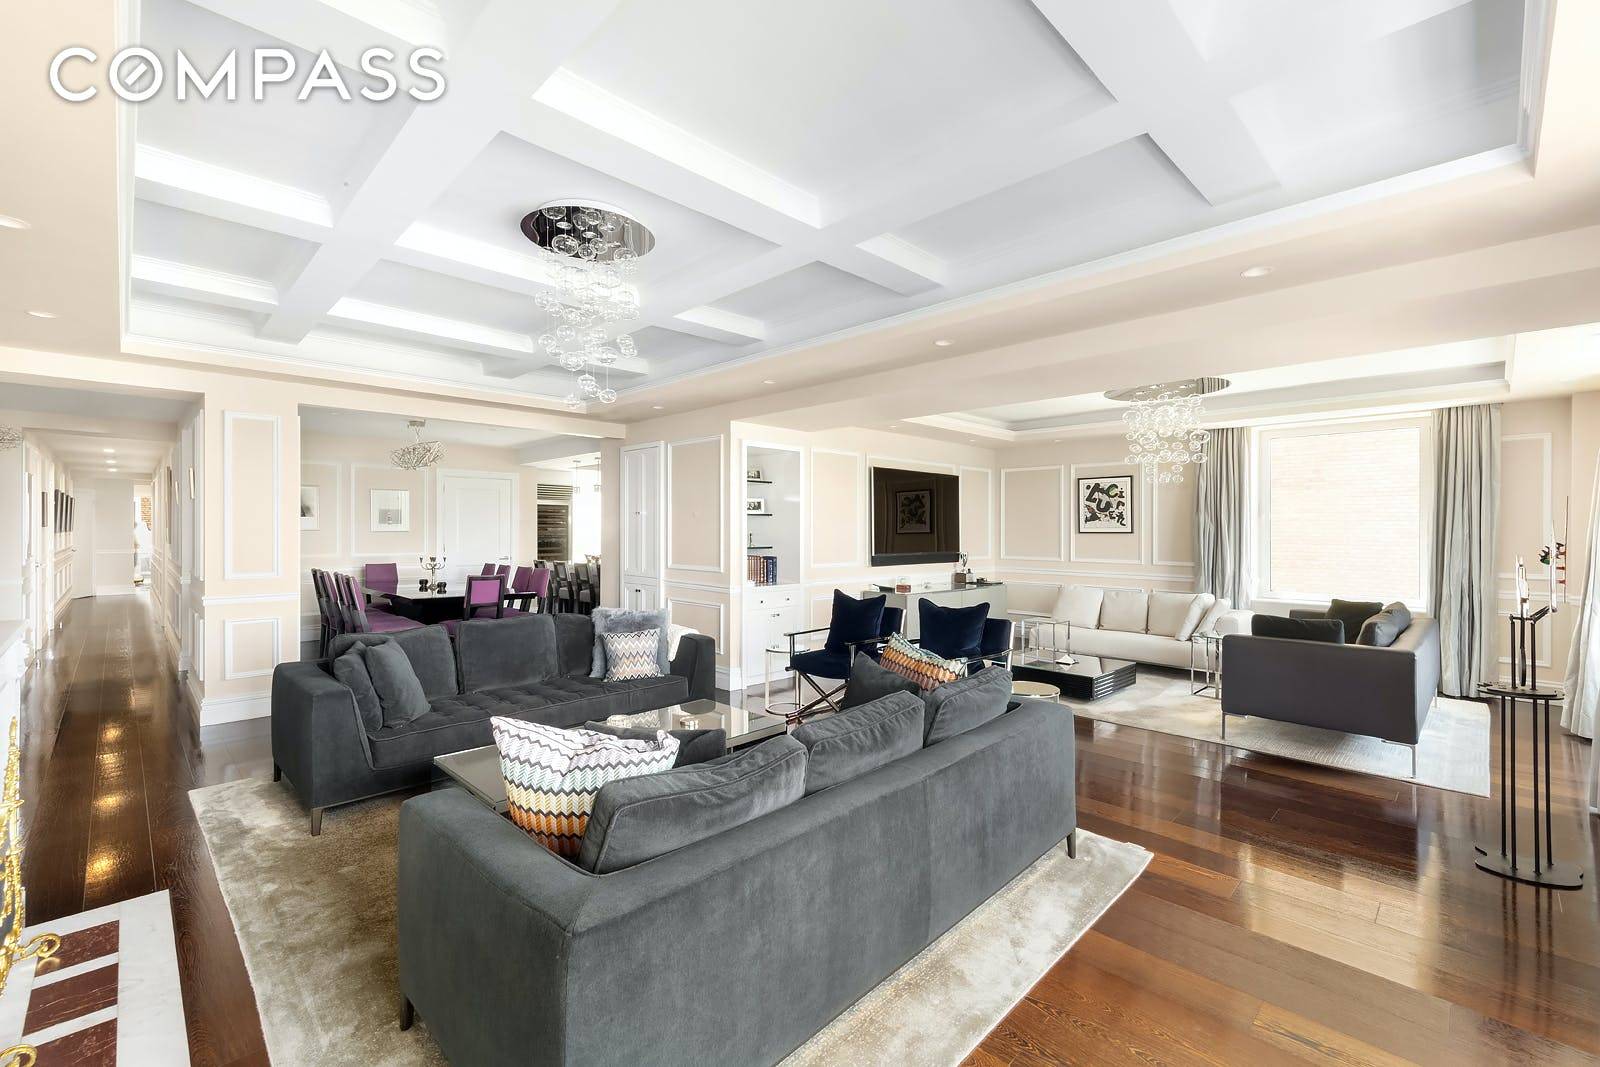 RARE OPPORTUNITY TO PURCHASE A GUT RENOVATED, TURNKEY 4 BED, 4 BATH HOME ON FIFTH AVENUE WITH DIRECT CENTRAL PARK VIEWS Apartment 9A is a newly renovated, move in ready ...